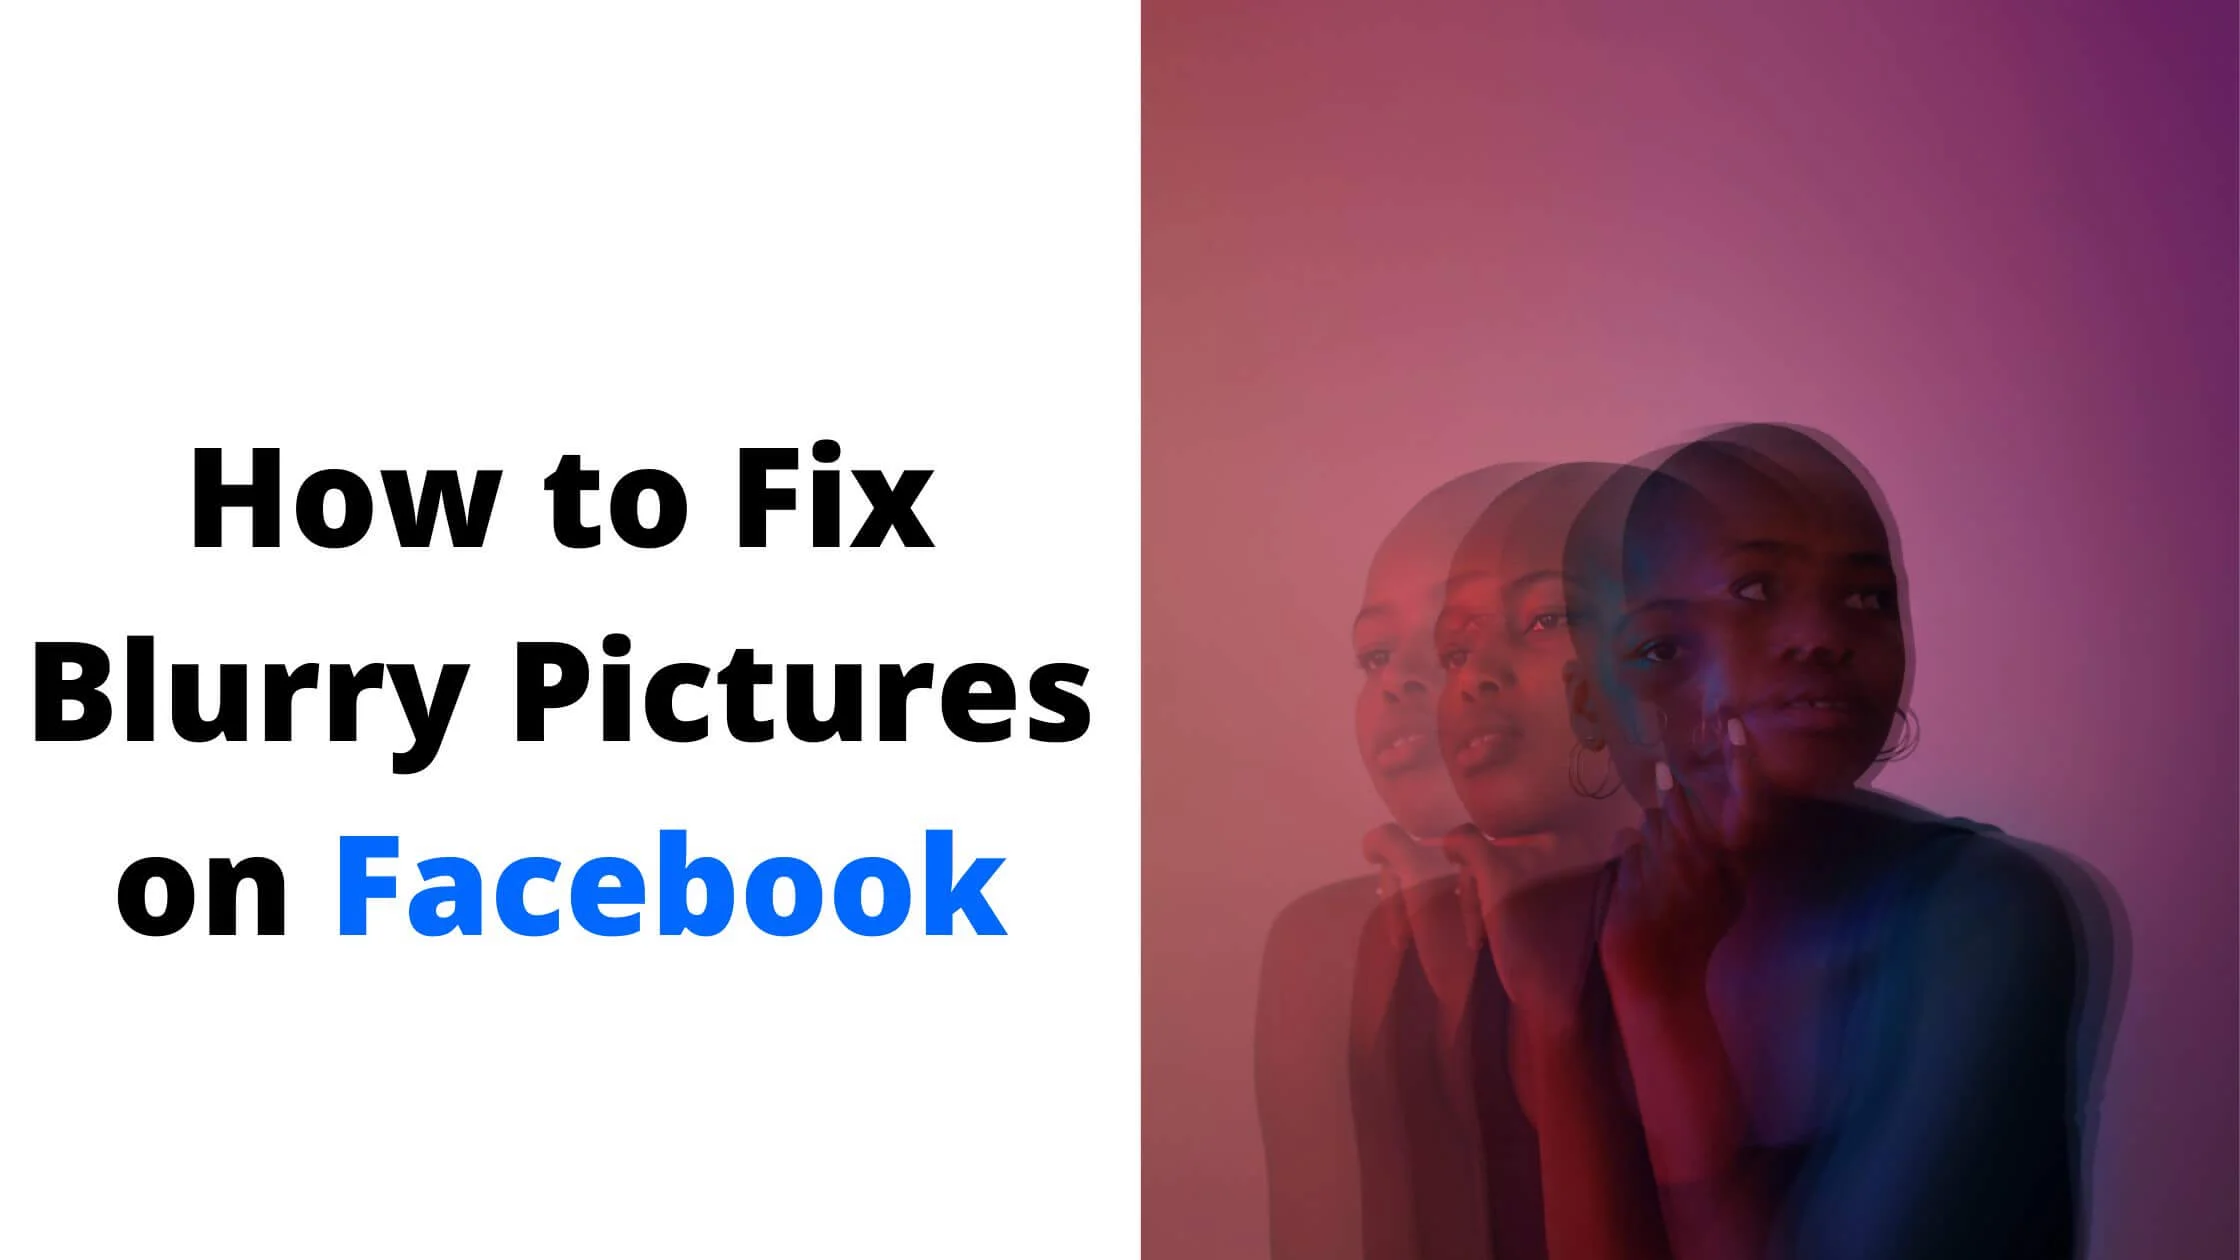 Fix Blurry Pictures on Facebook